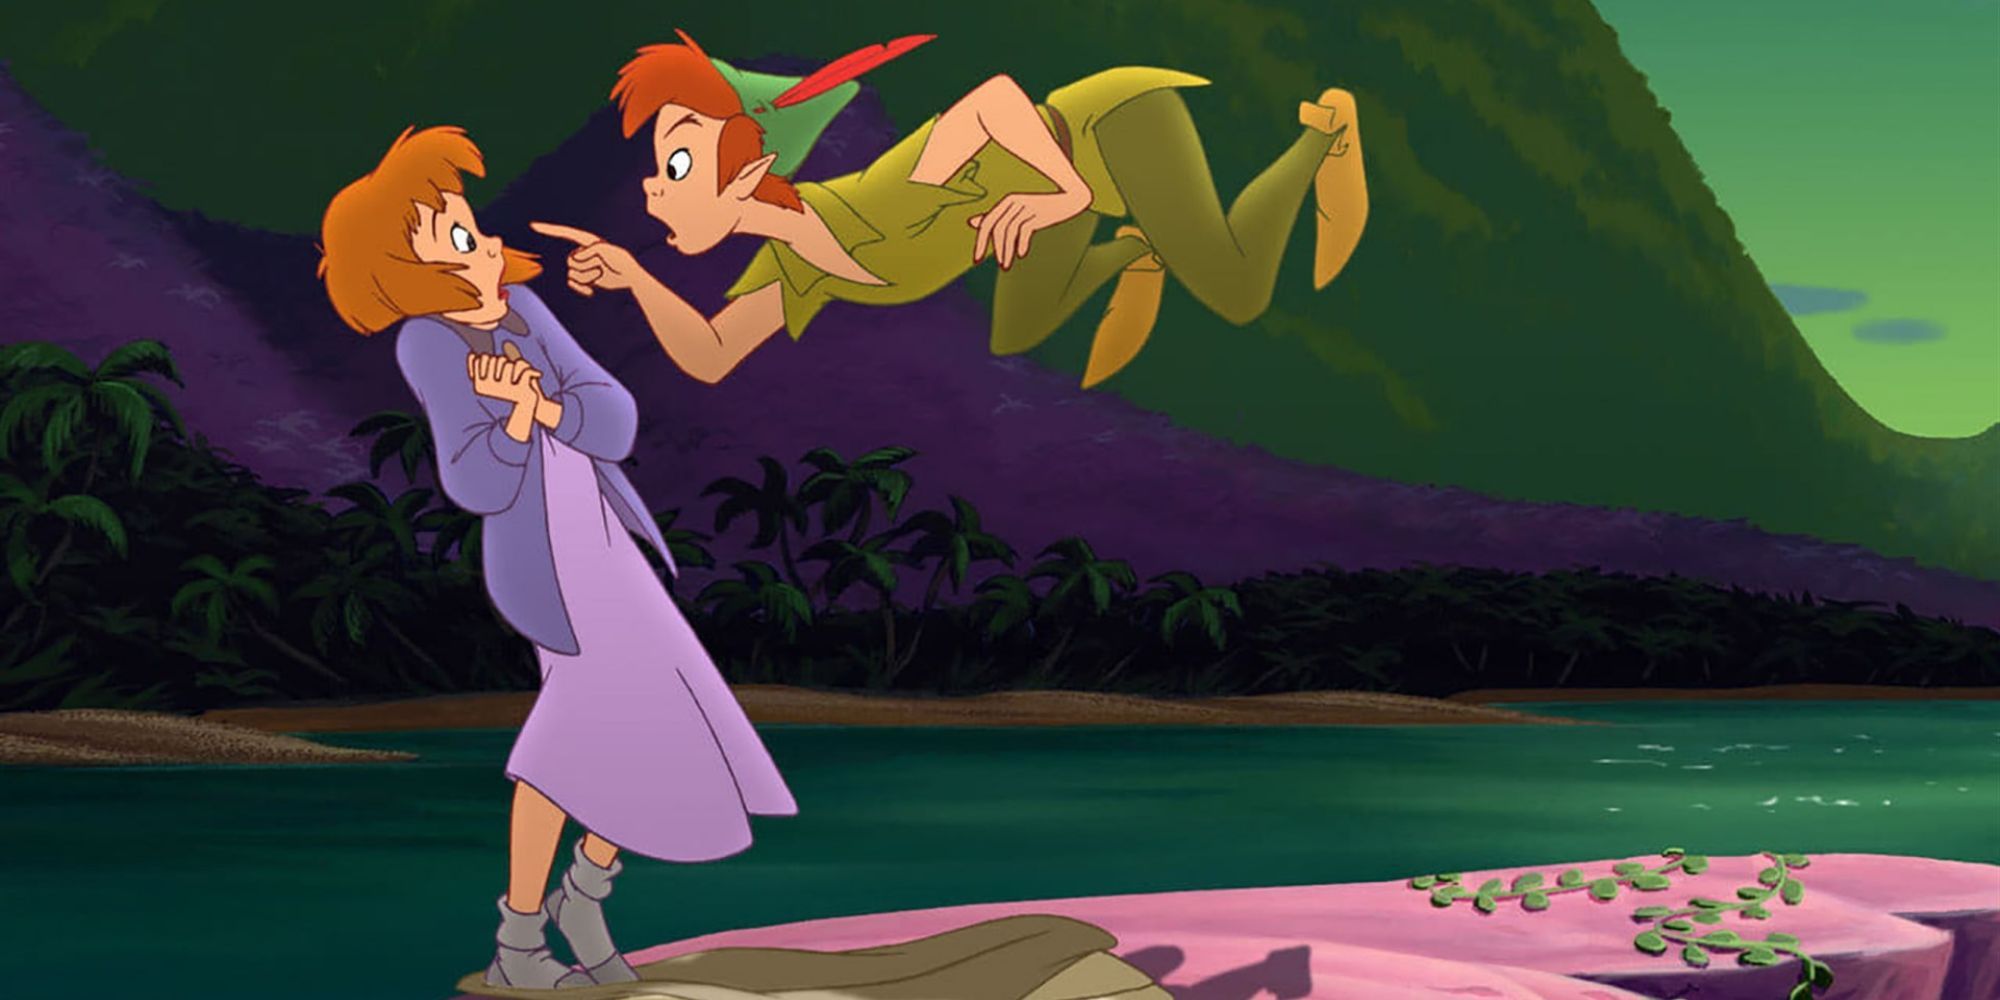 Jane and Peter Pan in Return to Never Land